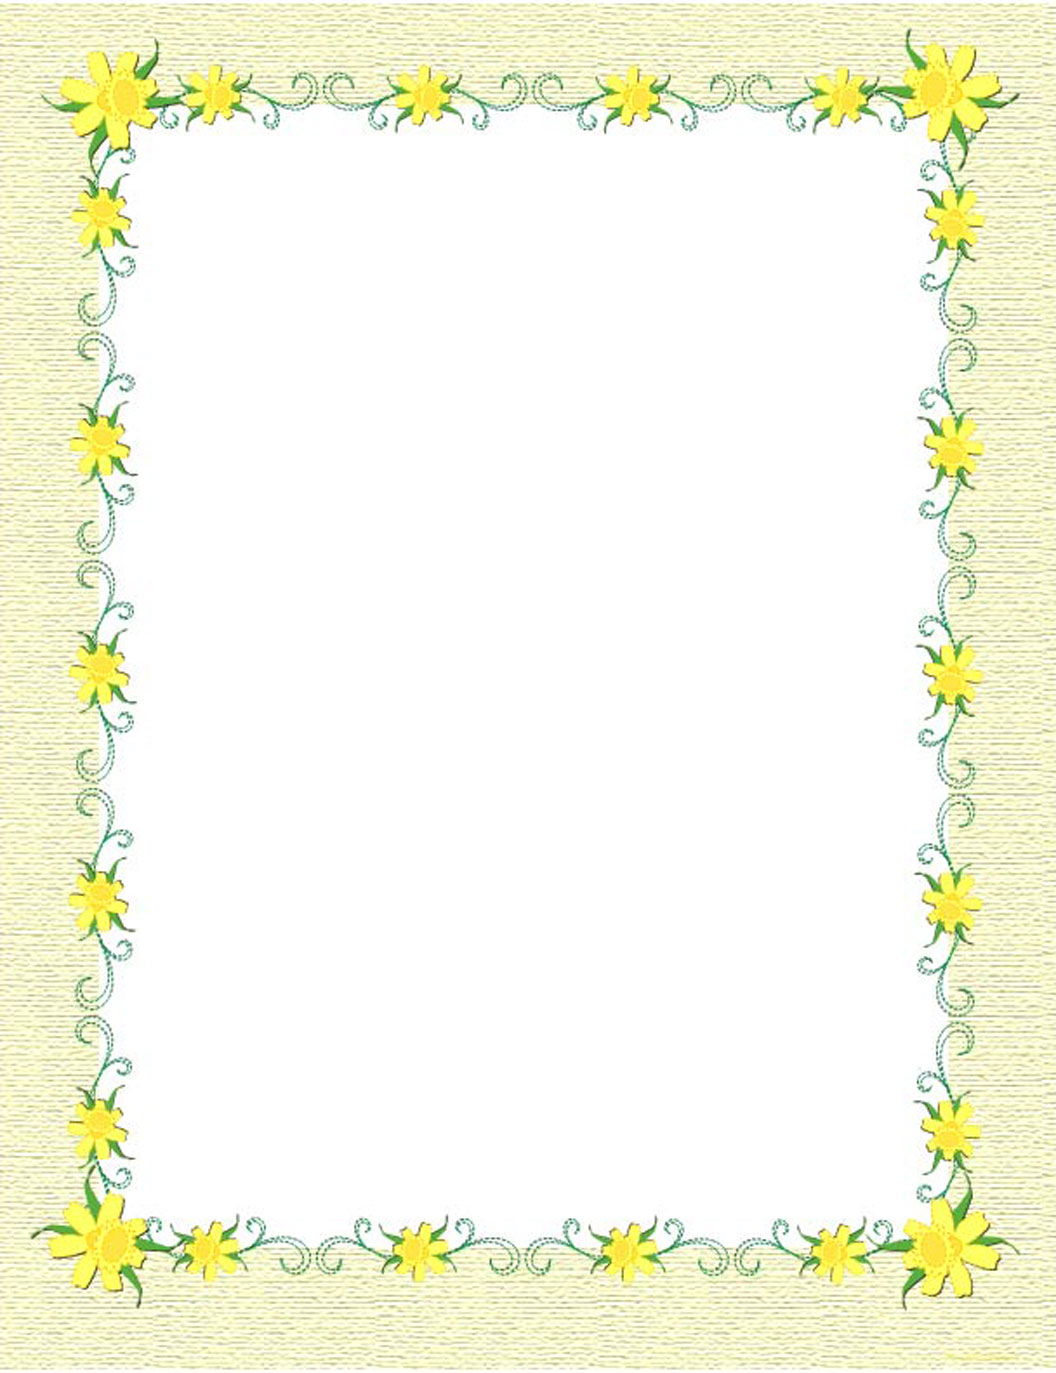 free clipart spring flowers border - photo #43